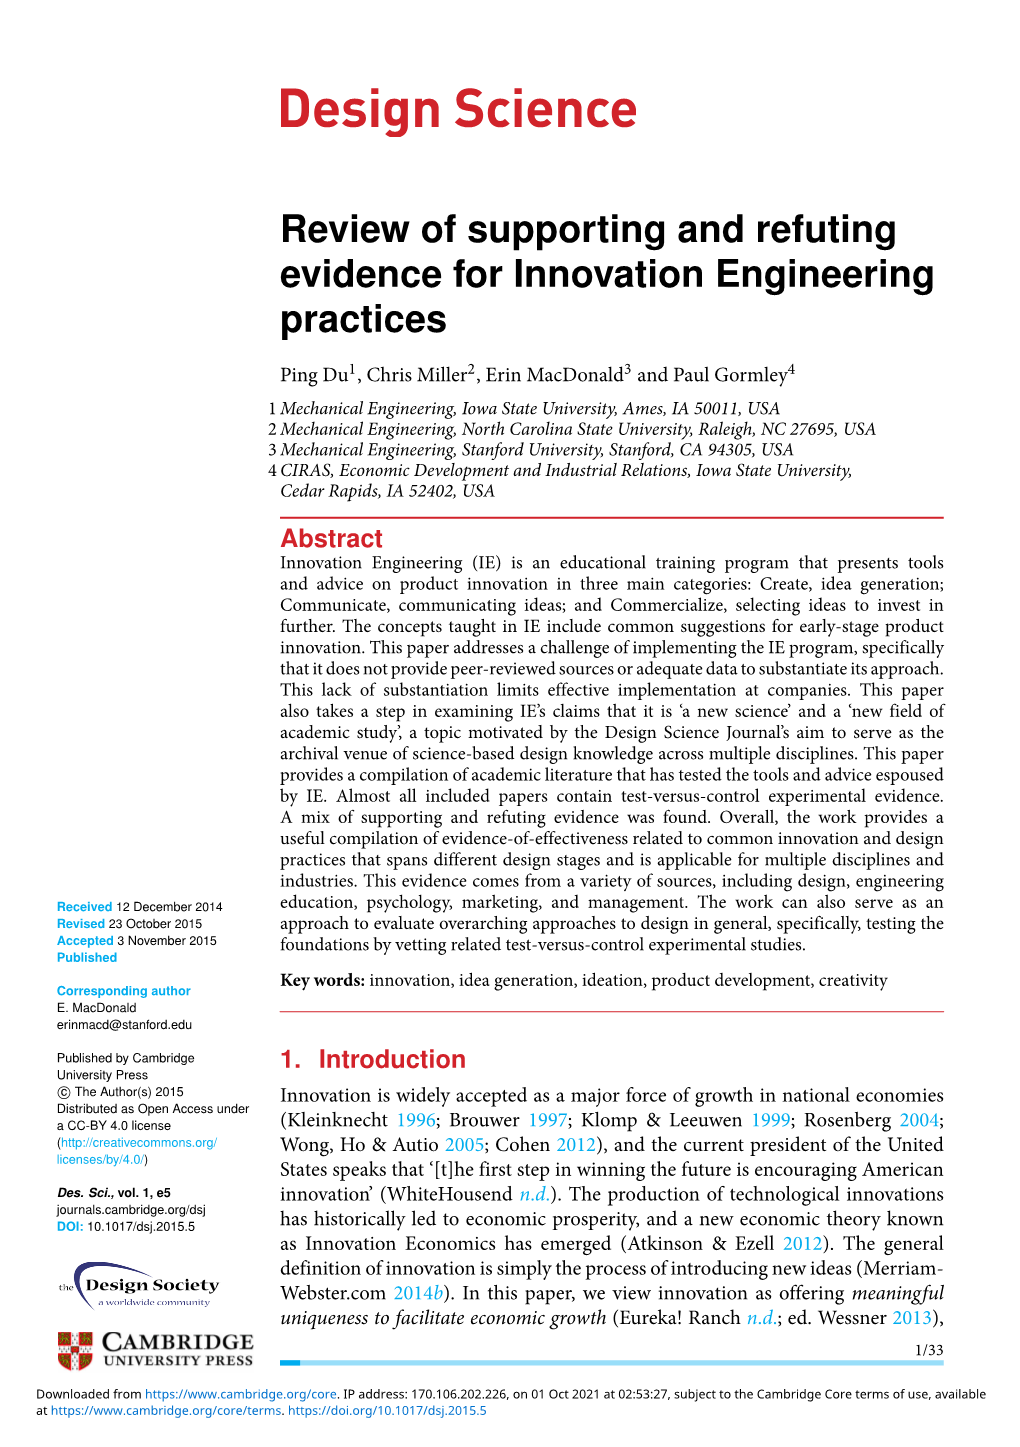 Review of Supporting and Refuting Evidence for Innovation Engineering Practices